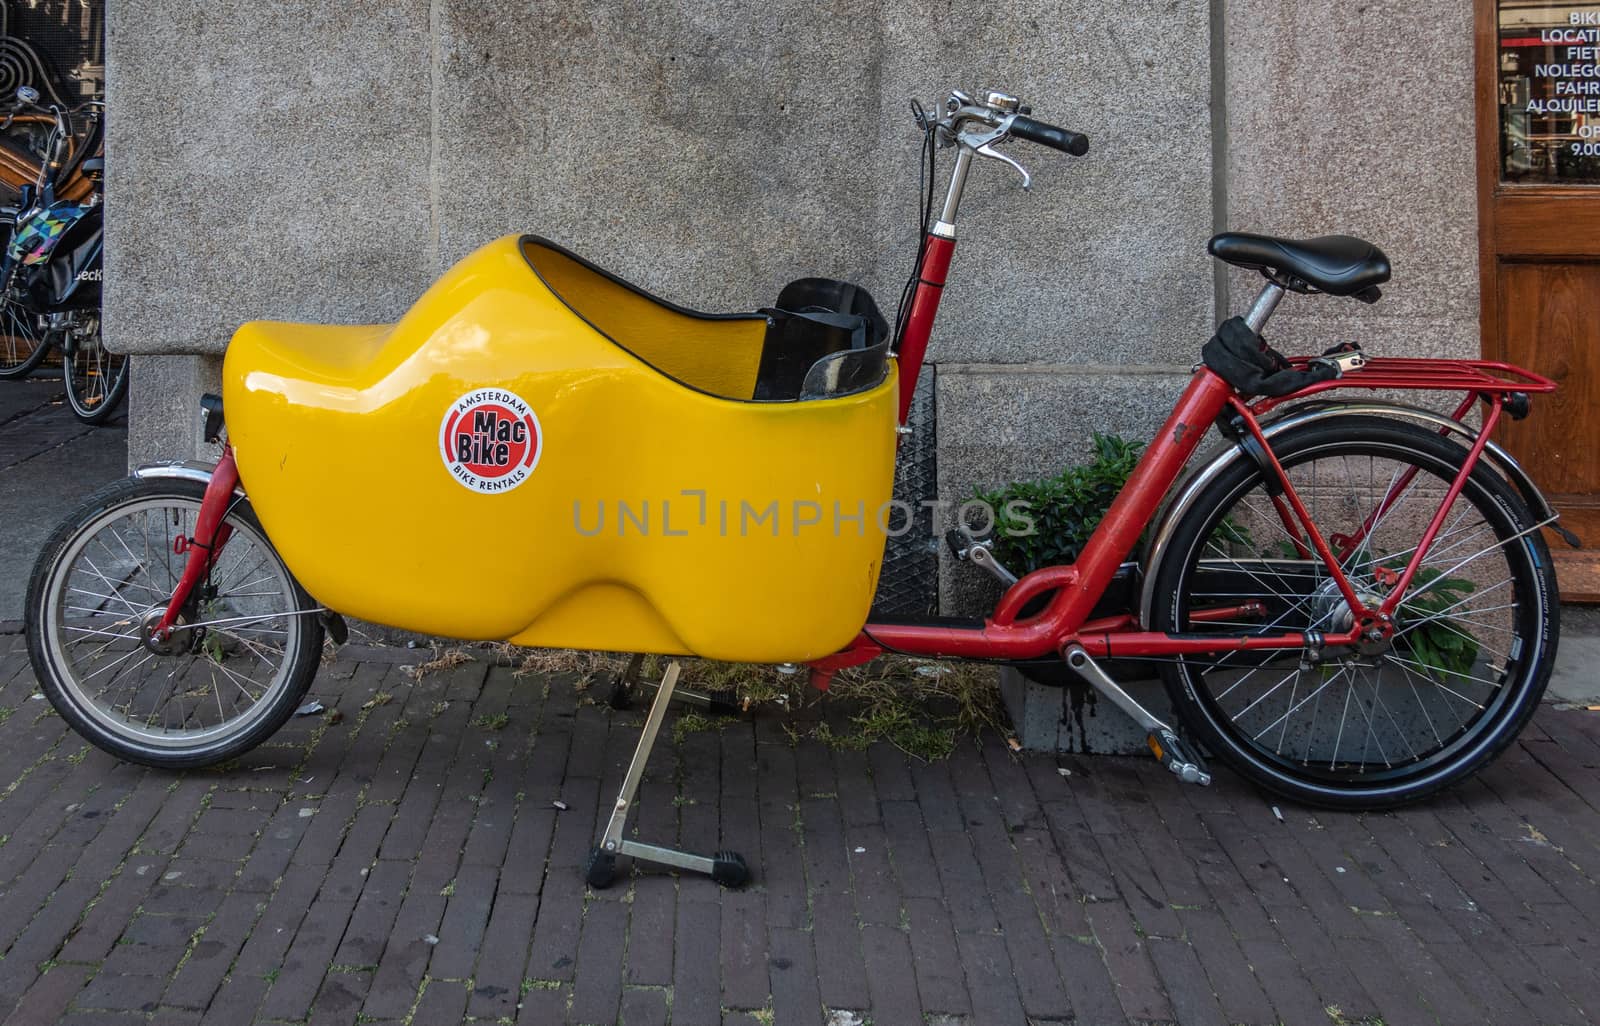 Parked Bakfiets or front-trunk bike in Amsterdam Netherlands. by Claudine